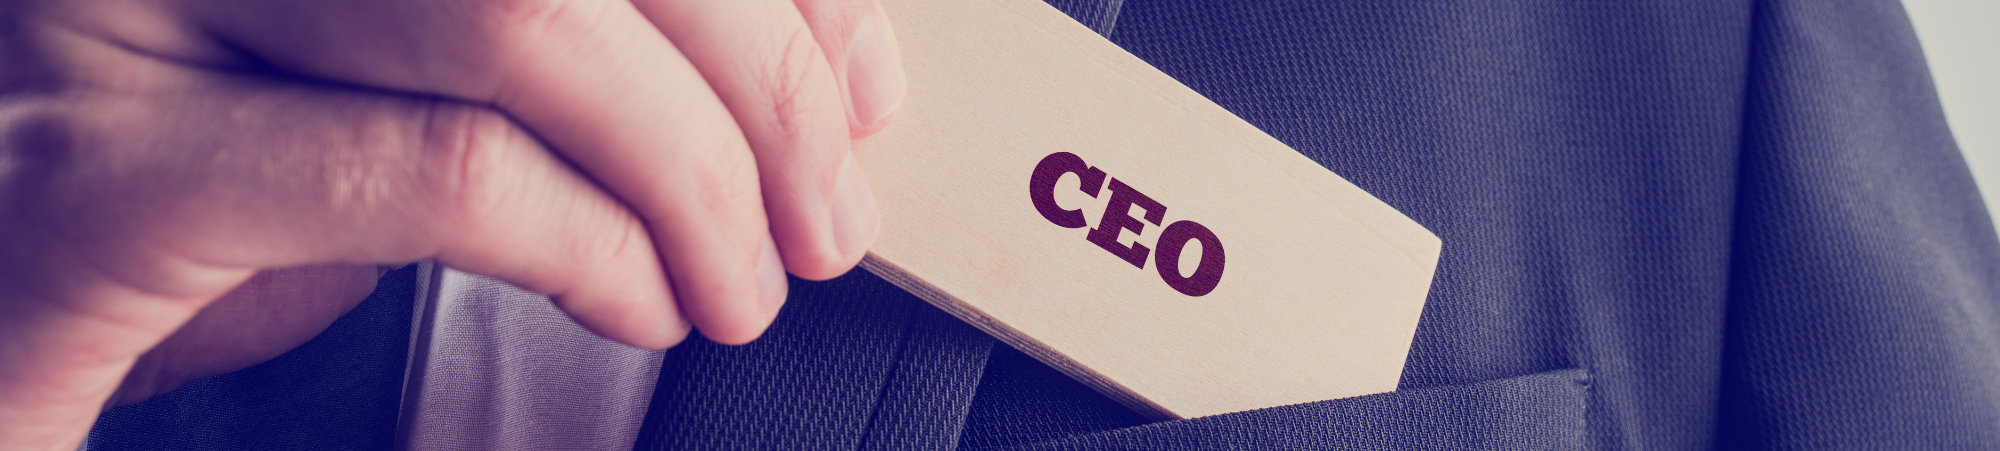 Photo of man in suit pulling out a CEO card